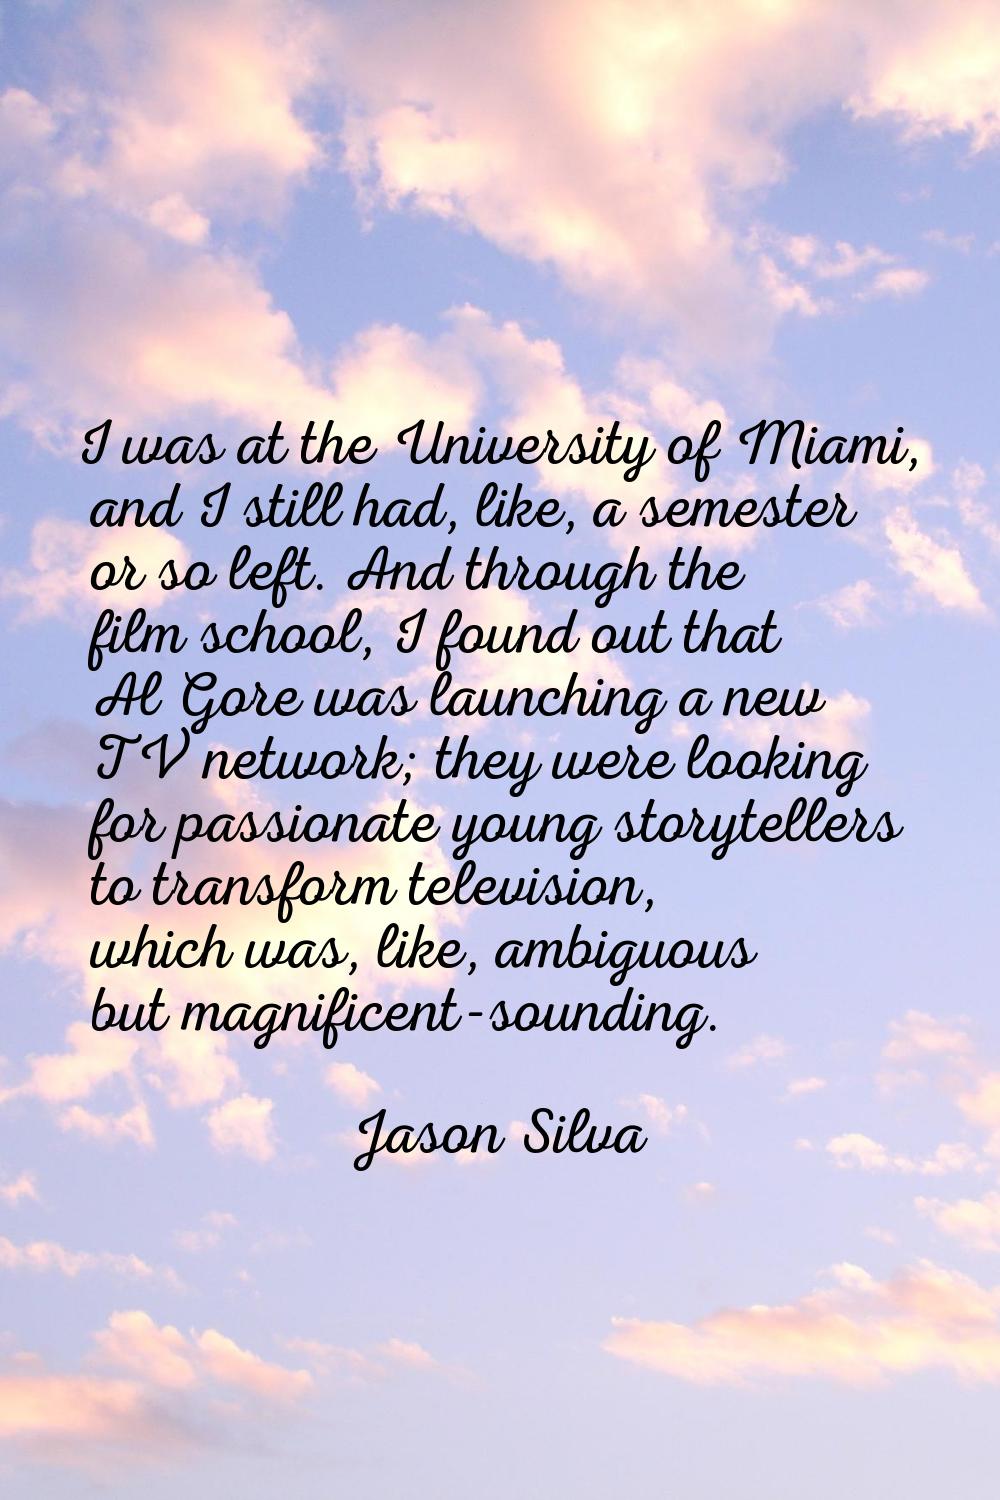 I was at the University of Miami, and I still had, like, a semester or so left. And through the fil